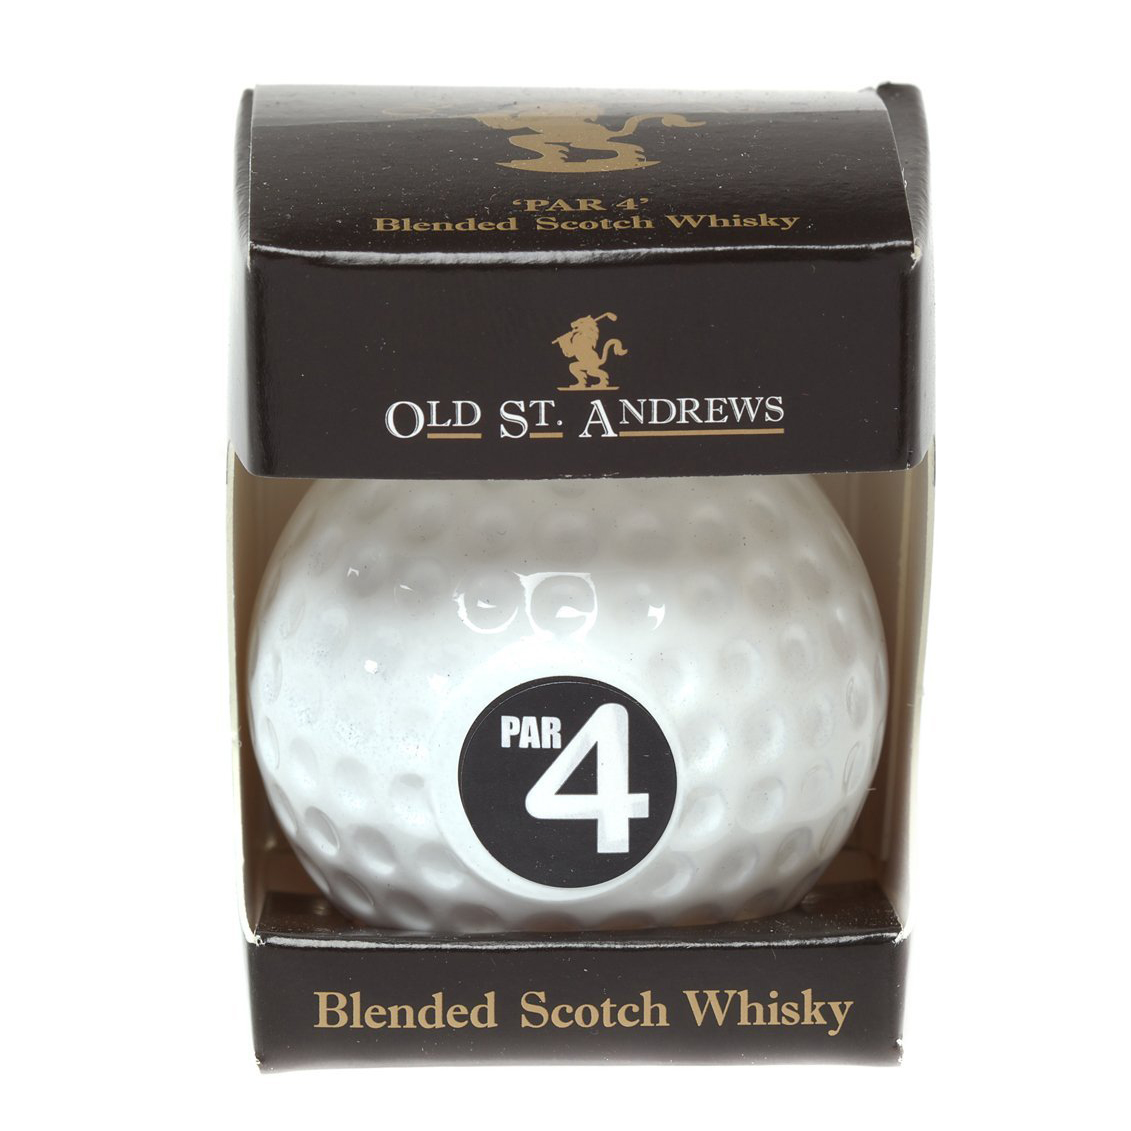 Buy Old St Andrews Par 4 Golf Ball with Blended Scotch Whisky